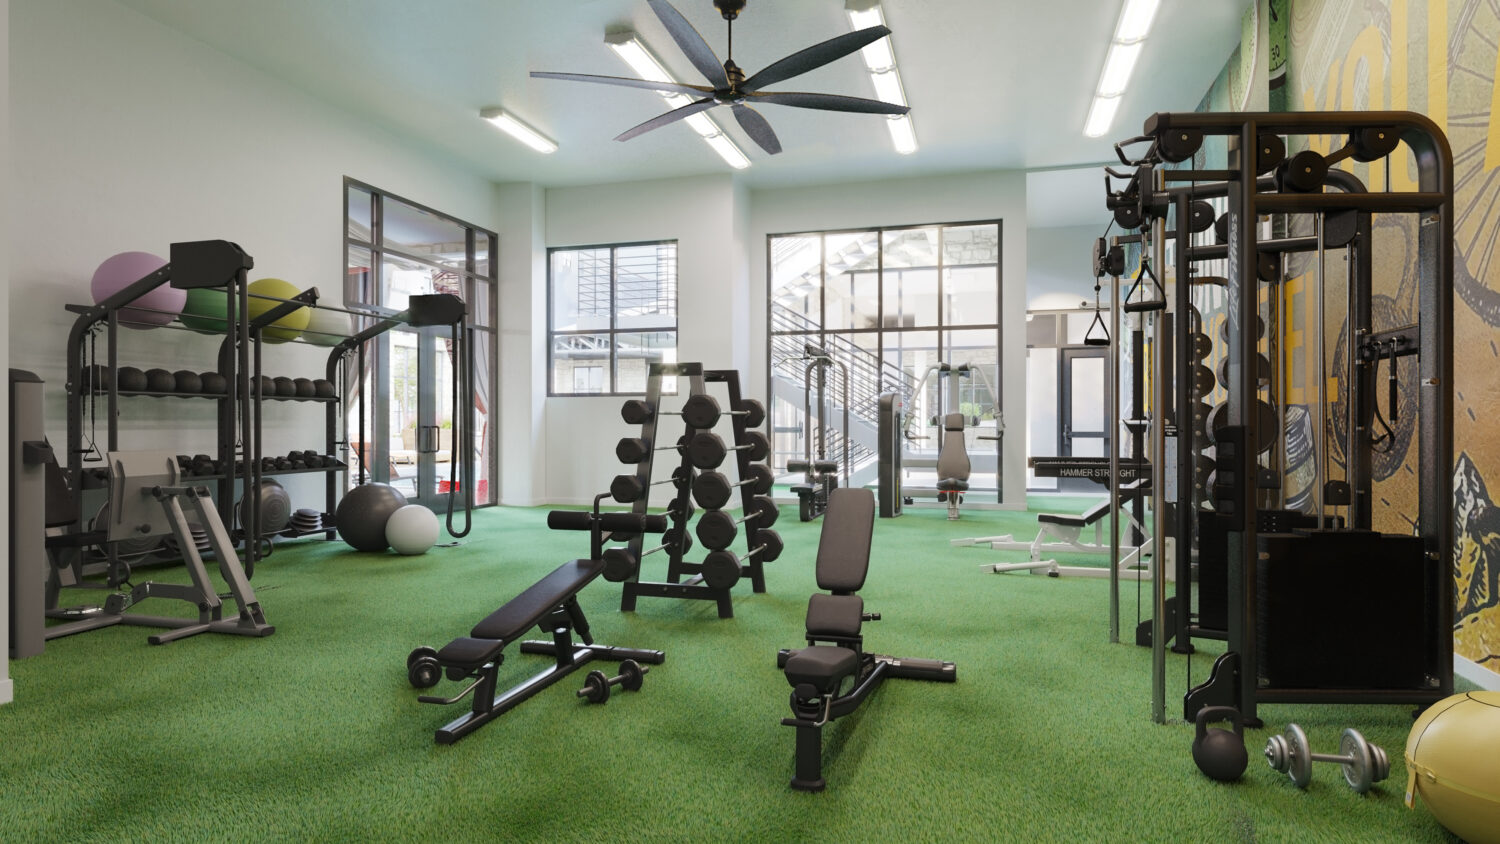 Fitness center with medicine calls, free weights, benches, cable machines and ceiling fans